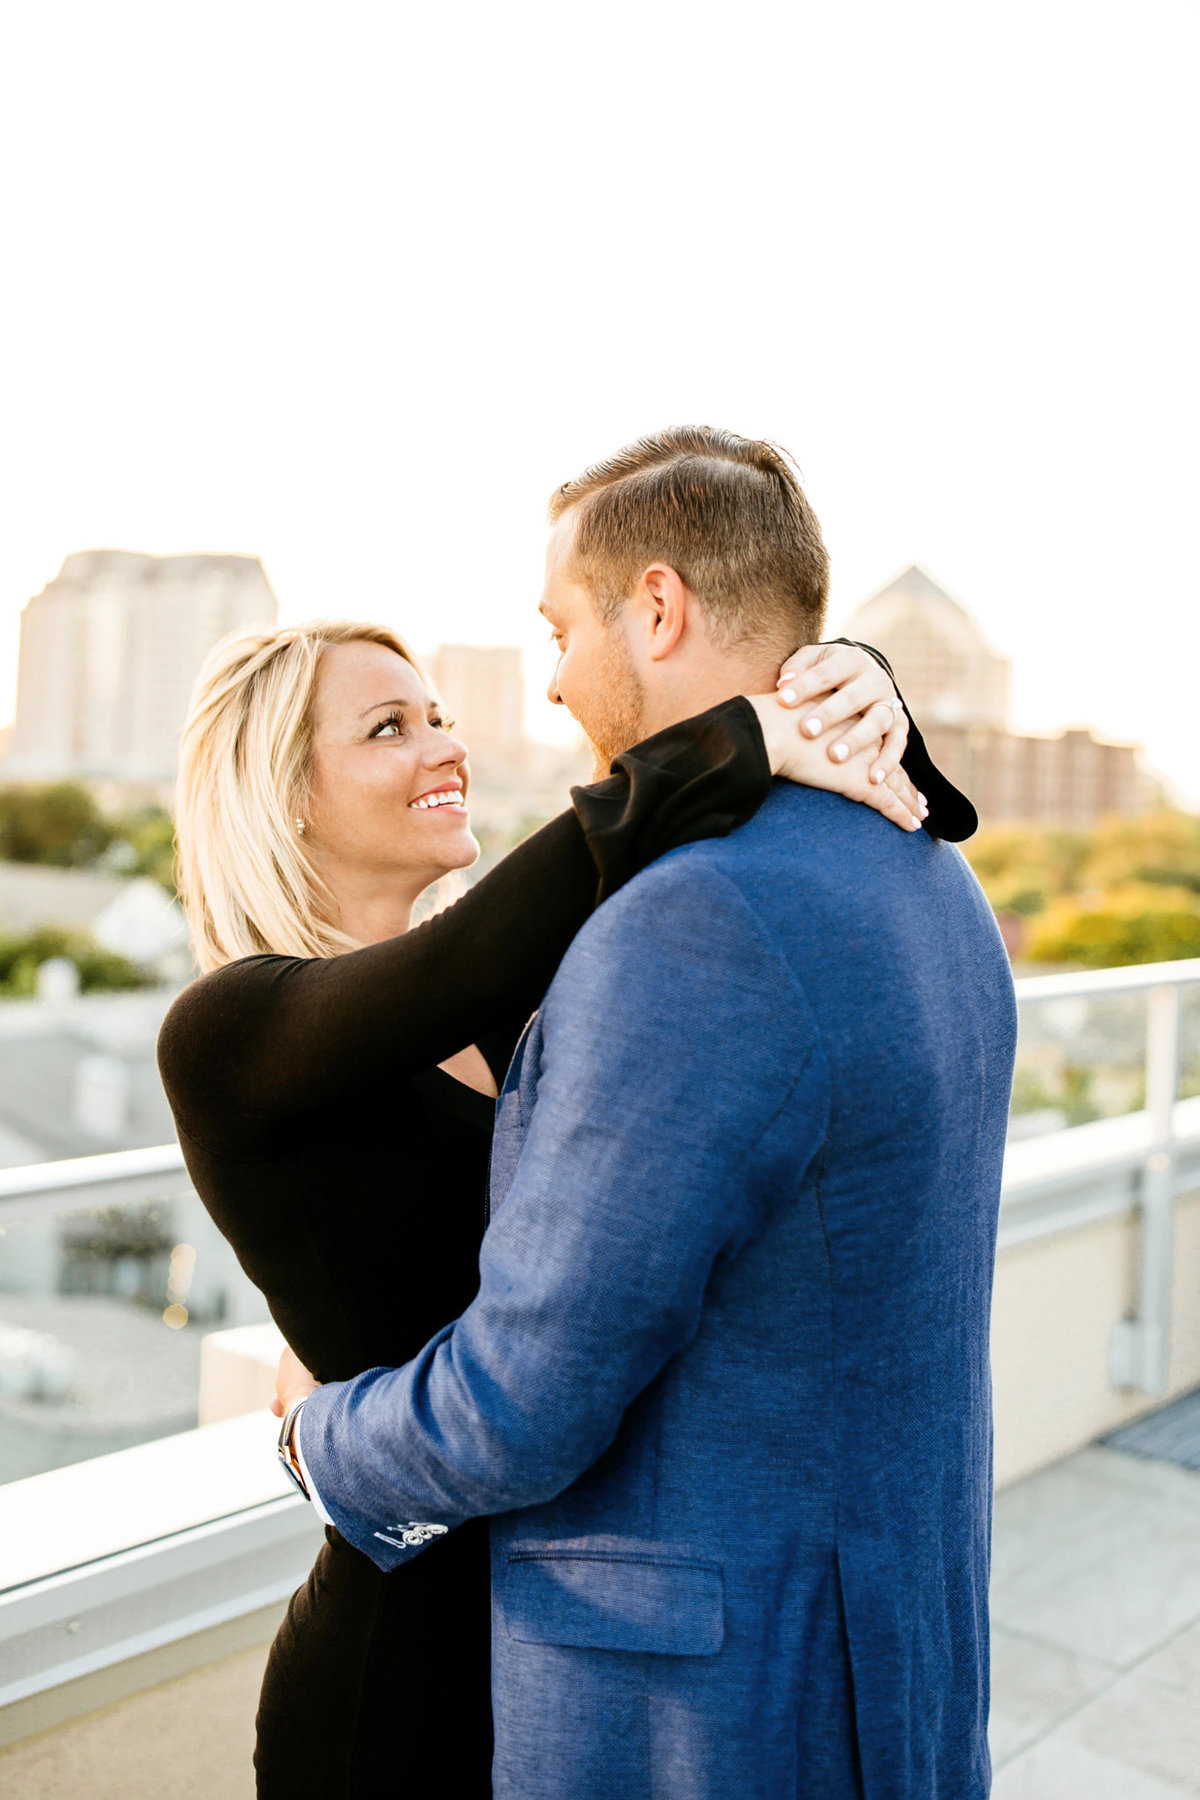 Eric & Megan - Downtown Dallas Rooftop Proposal & Engagement Session-107